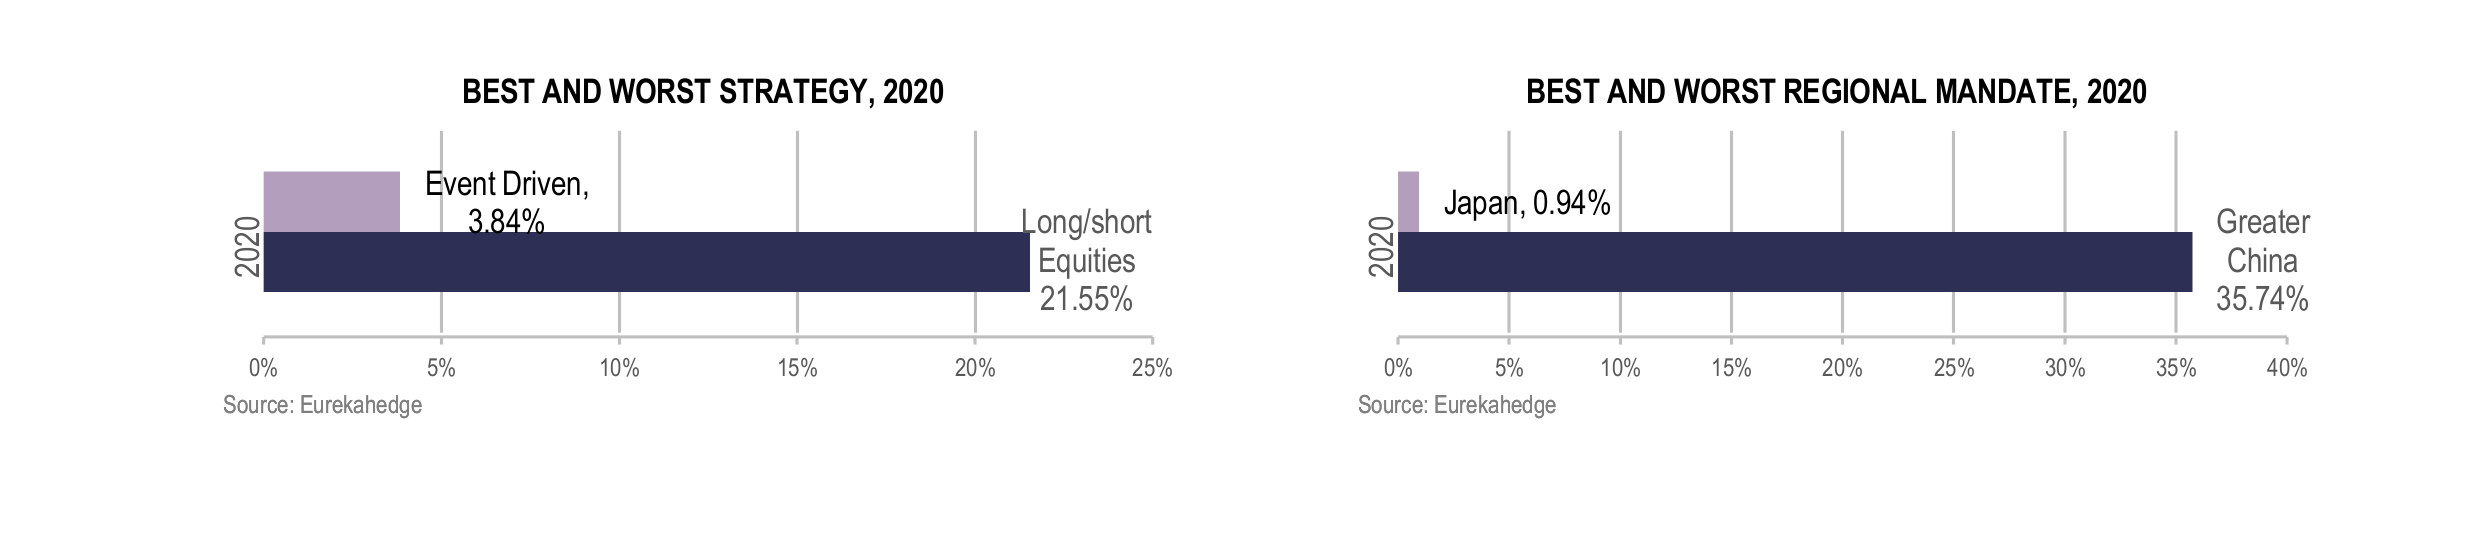 Asian Hedge Funds Infographic February 2021 - best and worst strategy and regional mandate